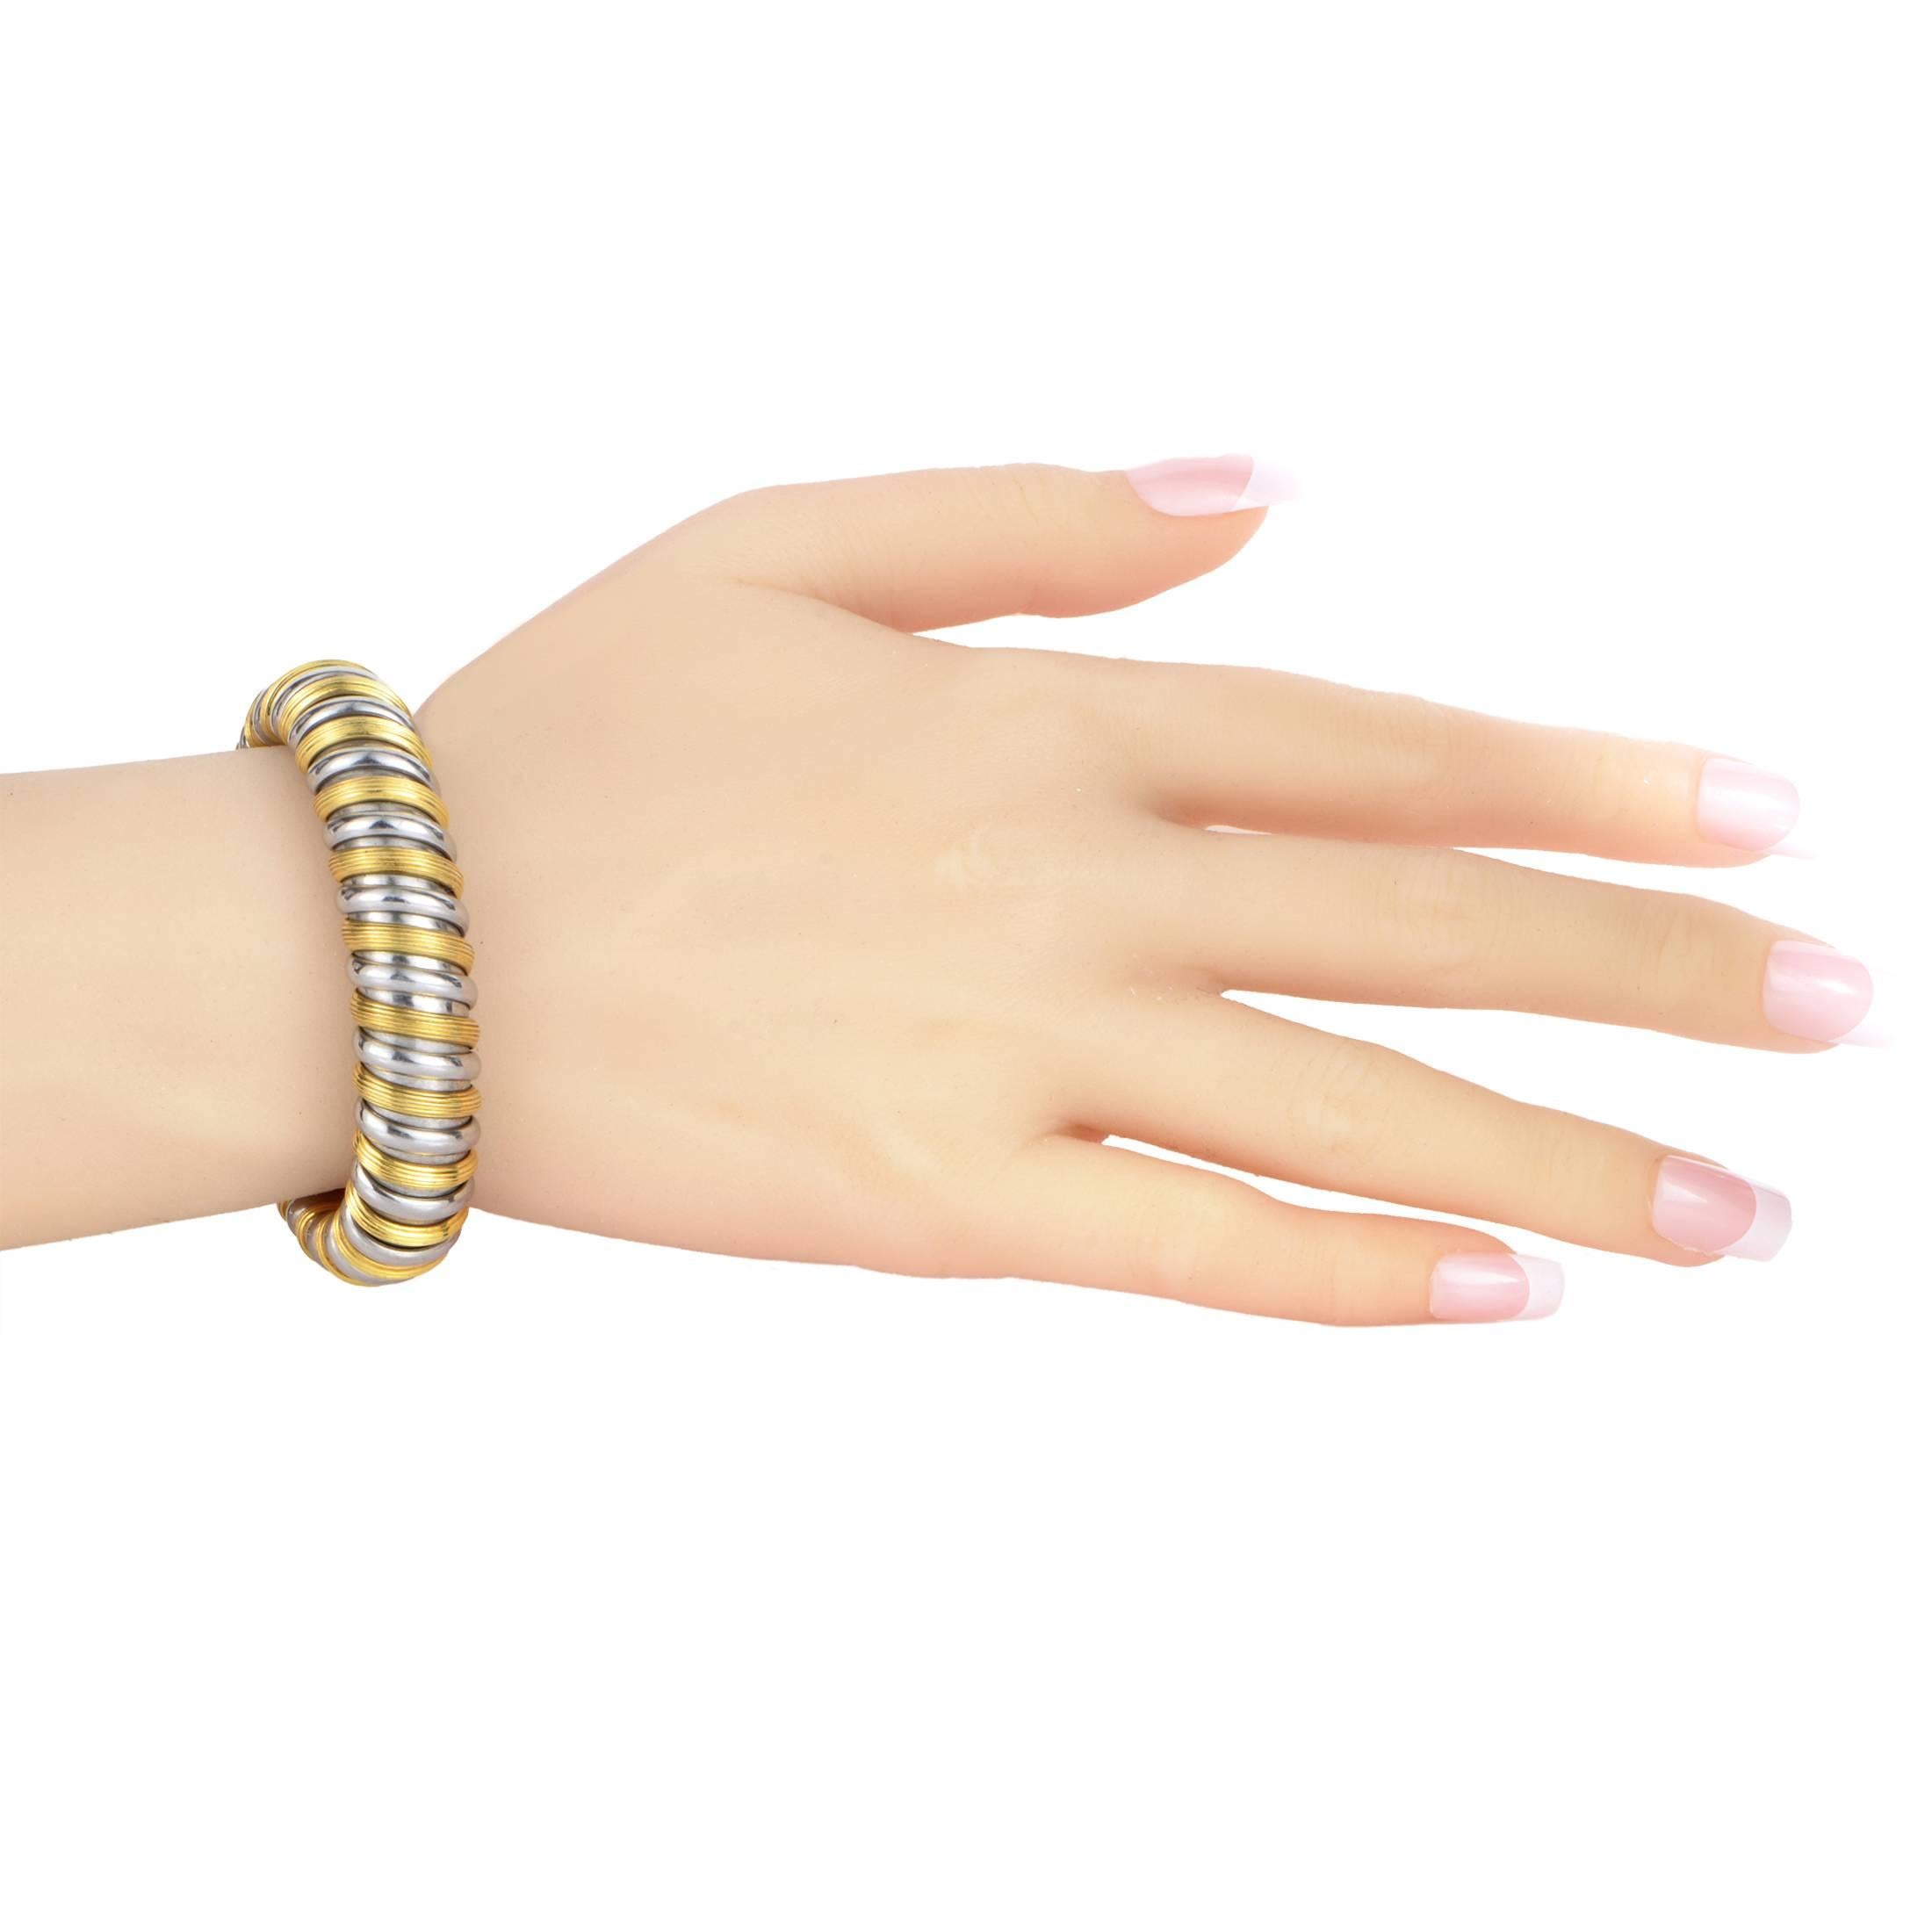 Two contrasting colors with fascinating gleam coil around this outstanding bracelet from Bulgari which is made of splendid stainless steel and luxurious 18K yellow gold for a mesmerizing visual effect.
Included Items: Manufacturer's Box